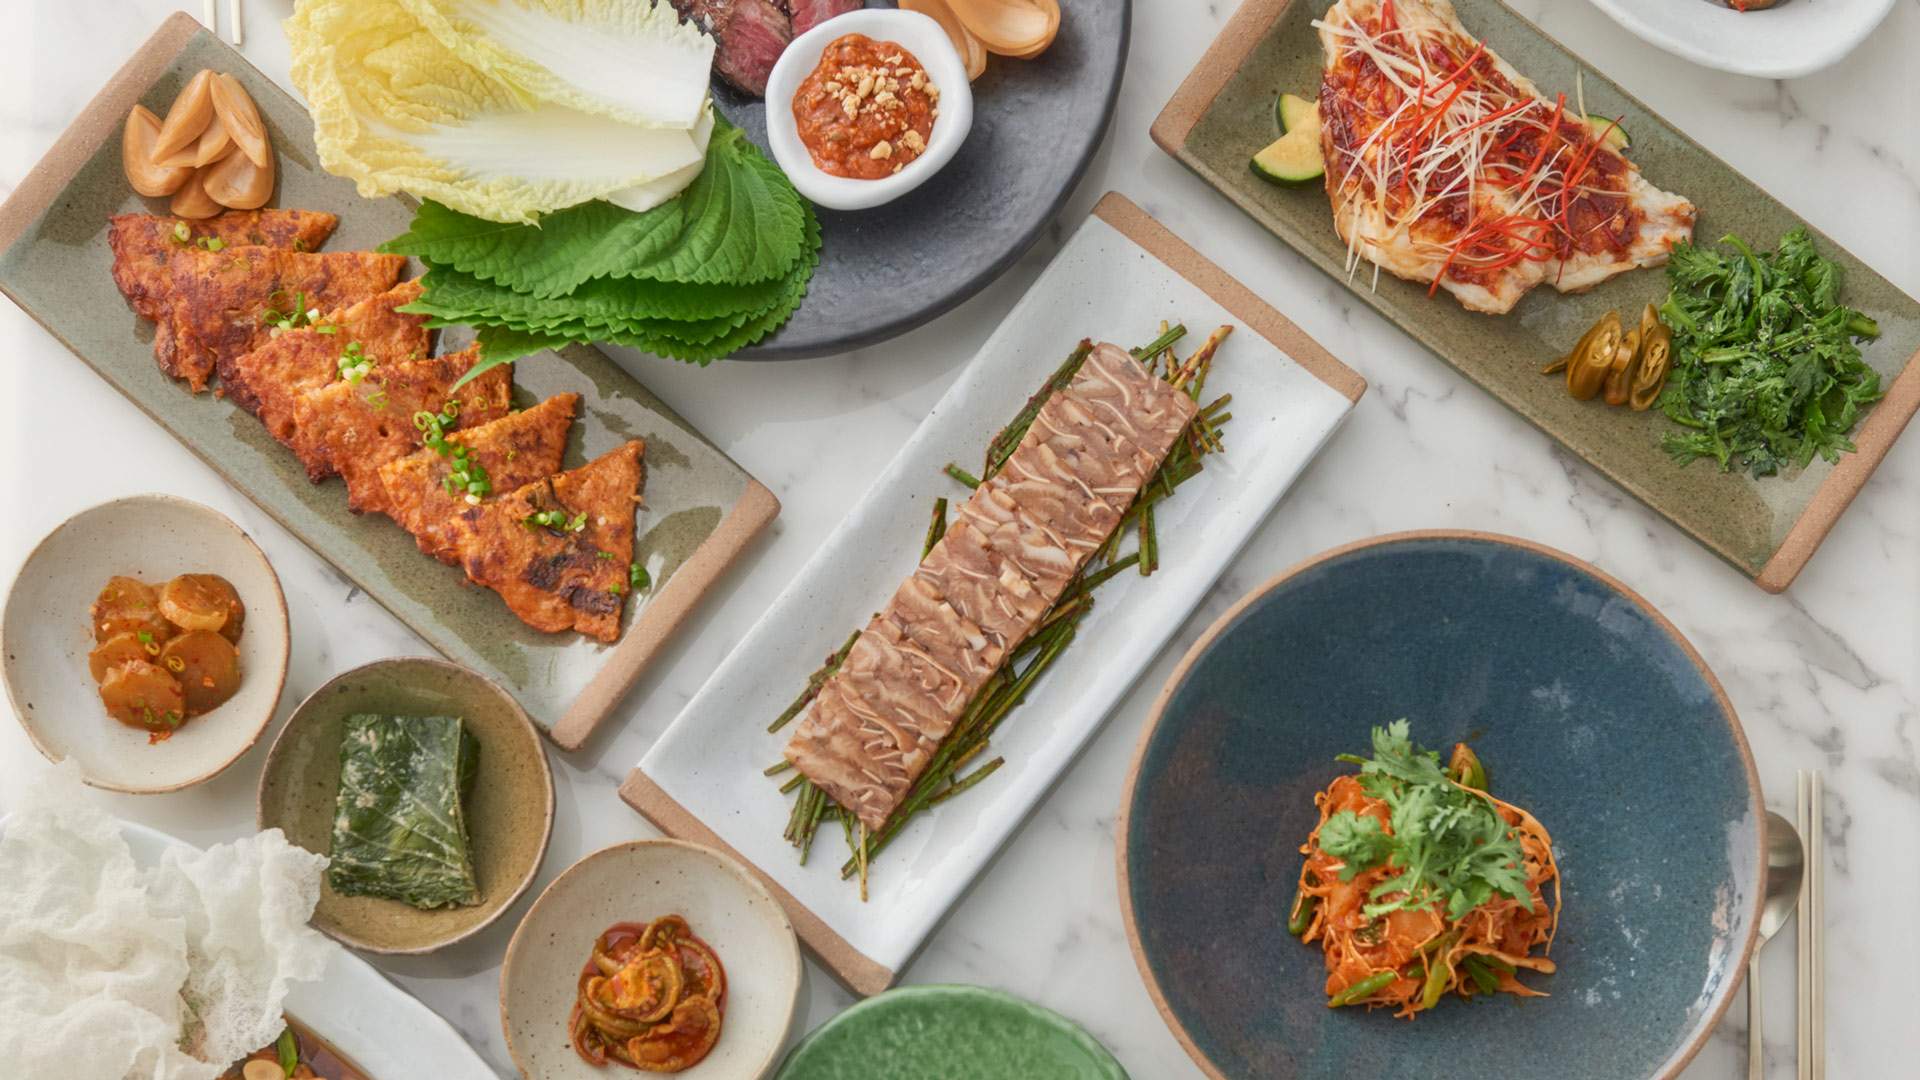 Melbourne Has a New Korean Restaurant With a Standout Wine List